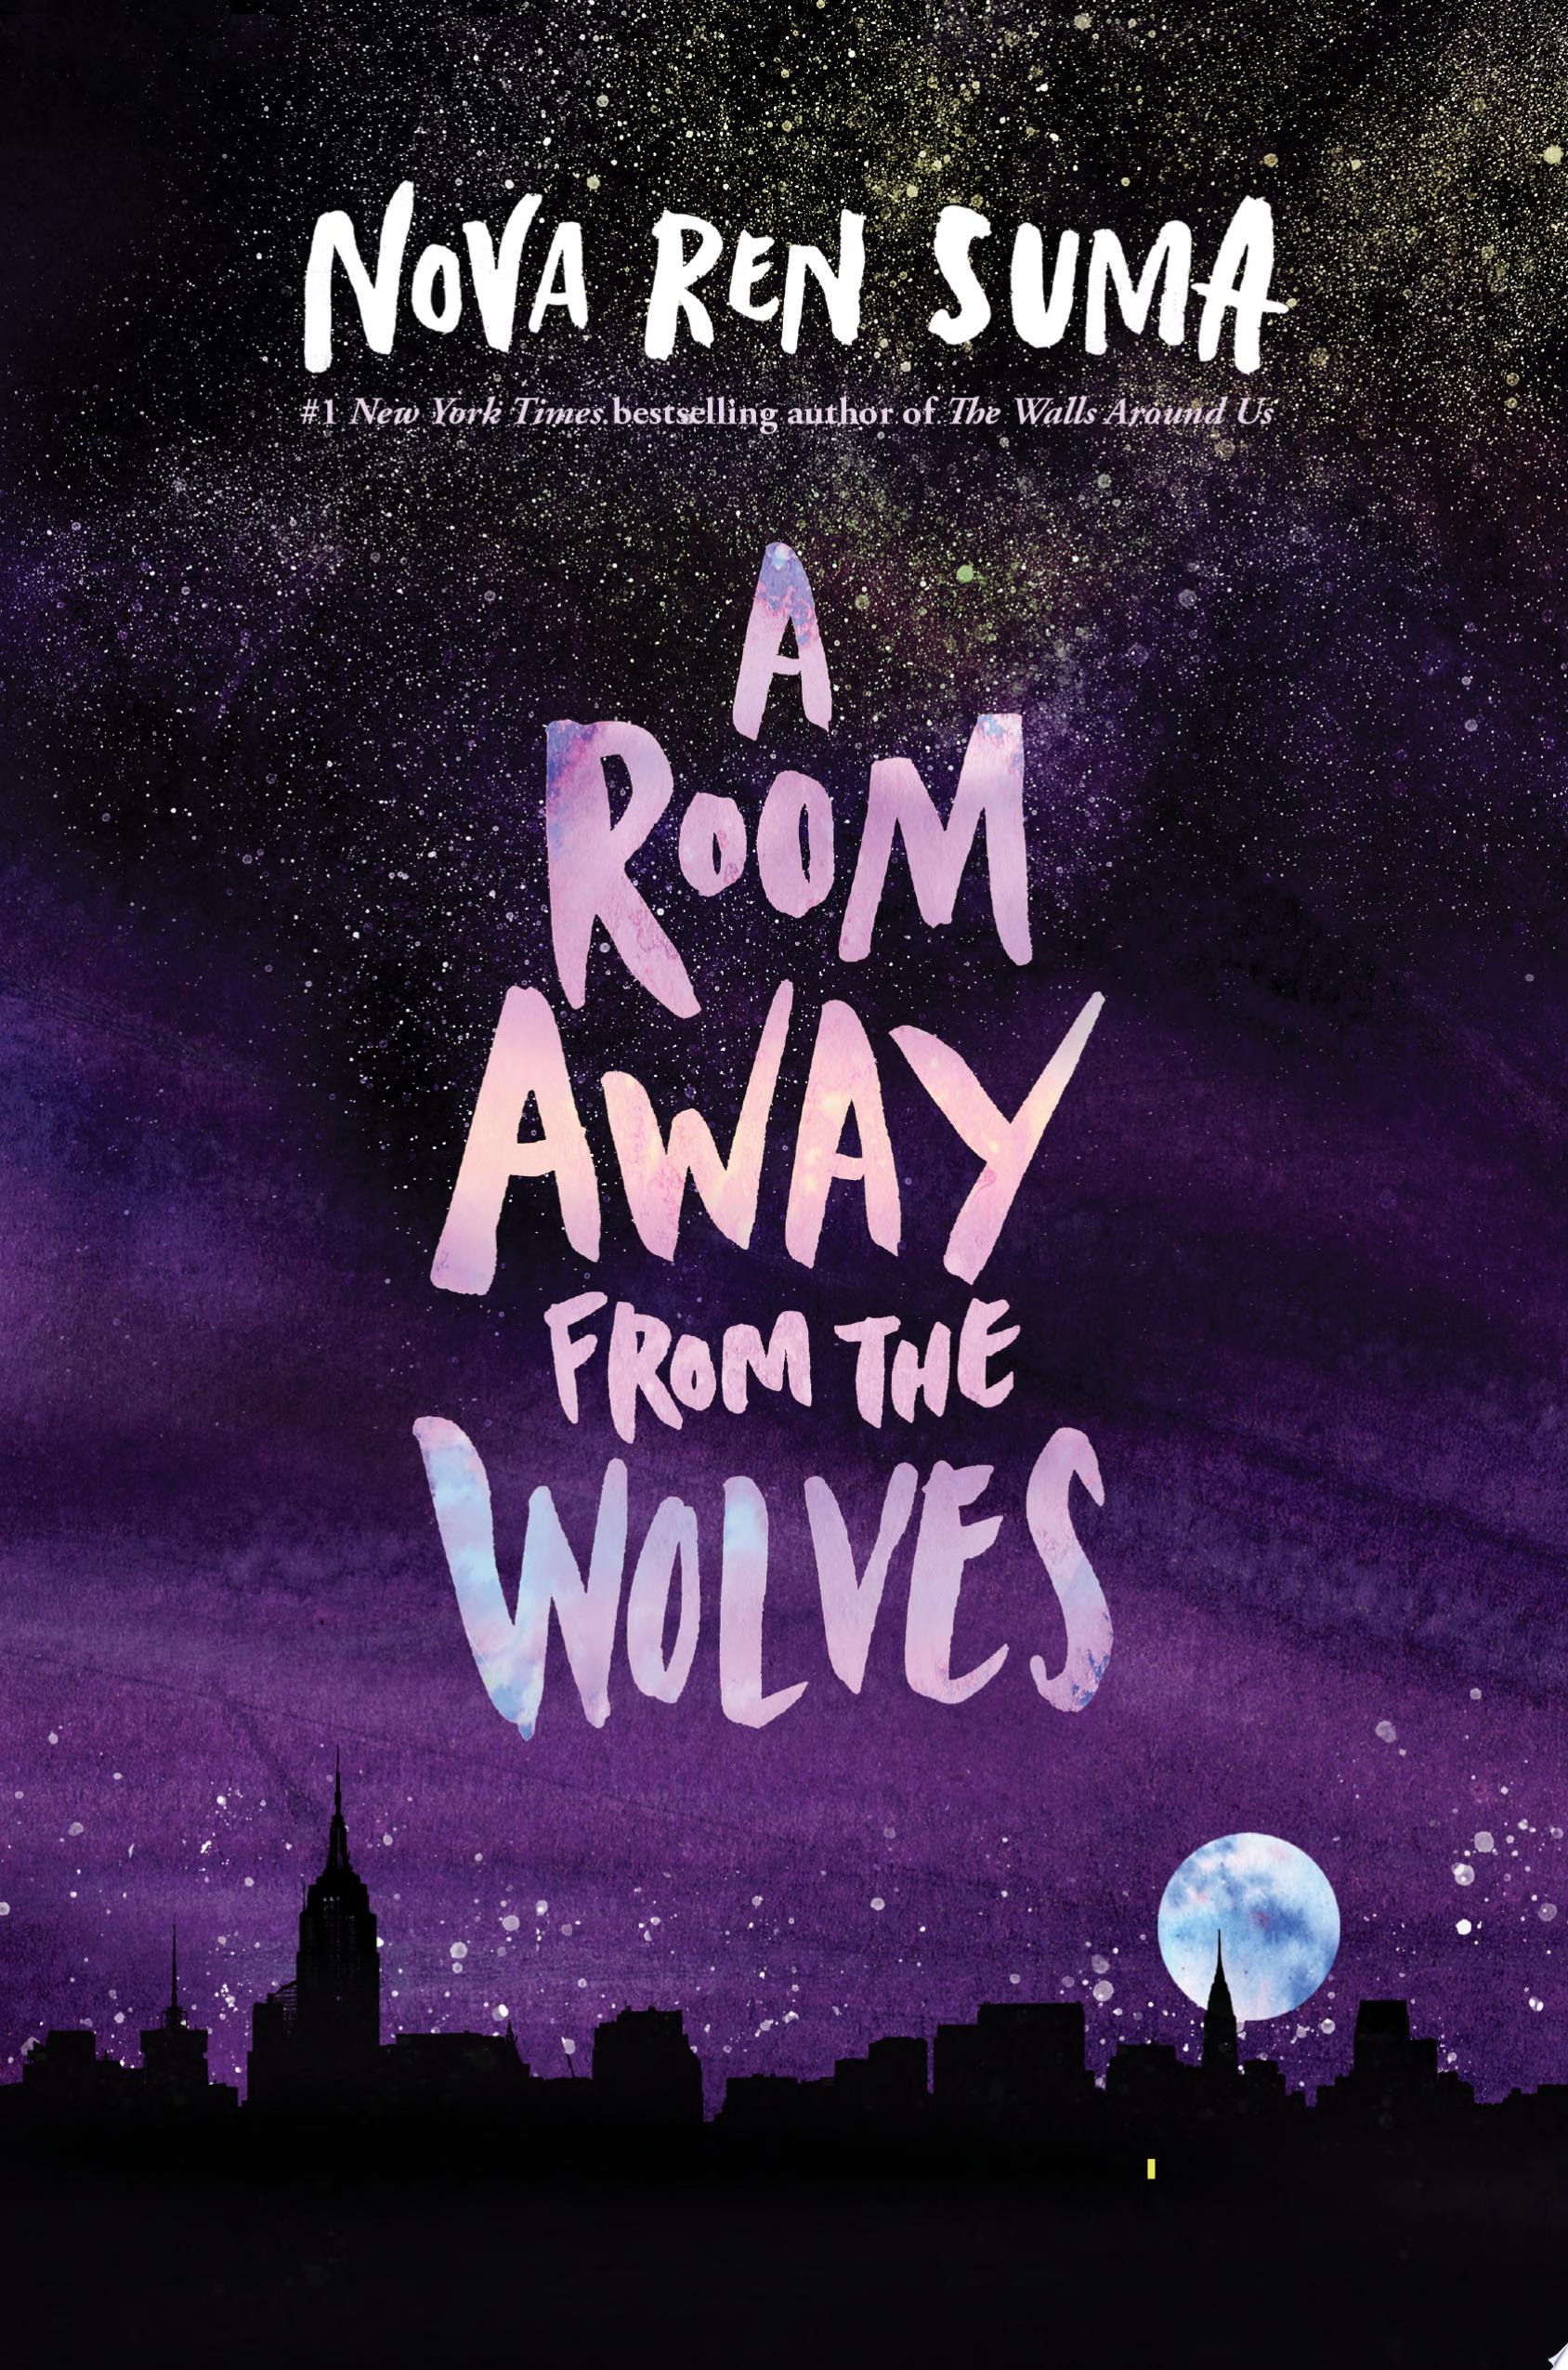 Image for "A Room Away From the Wolves"